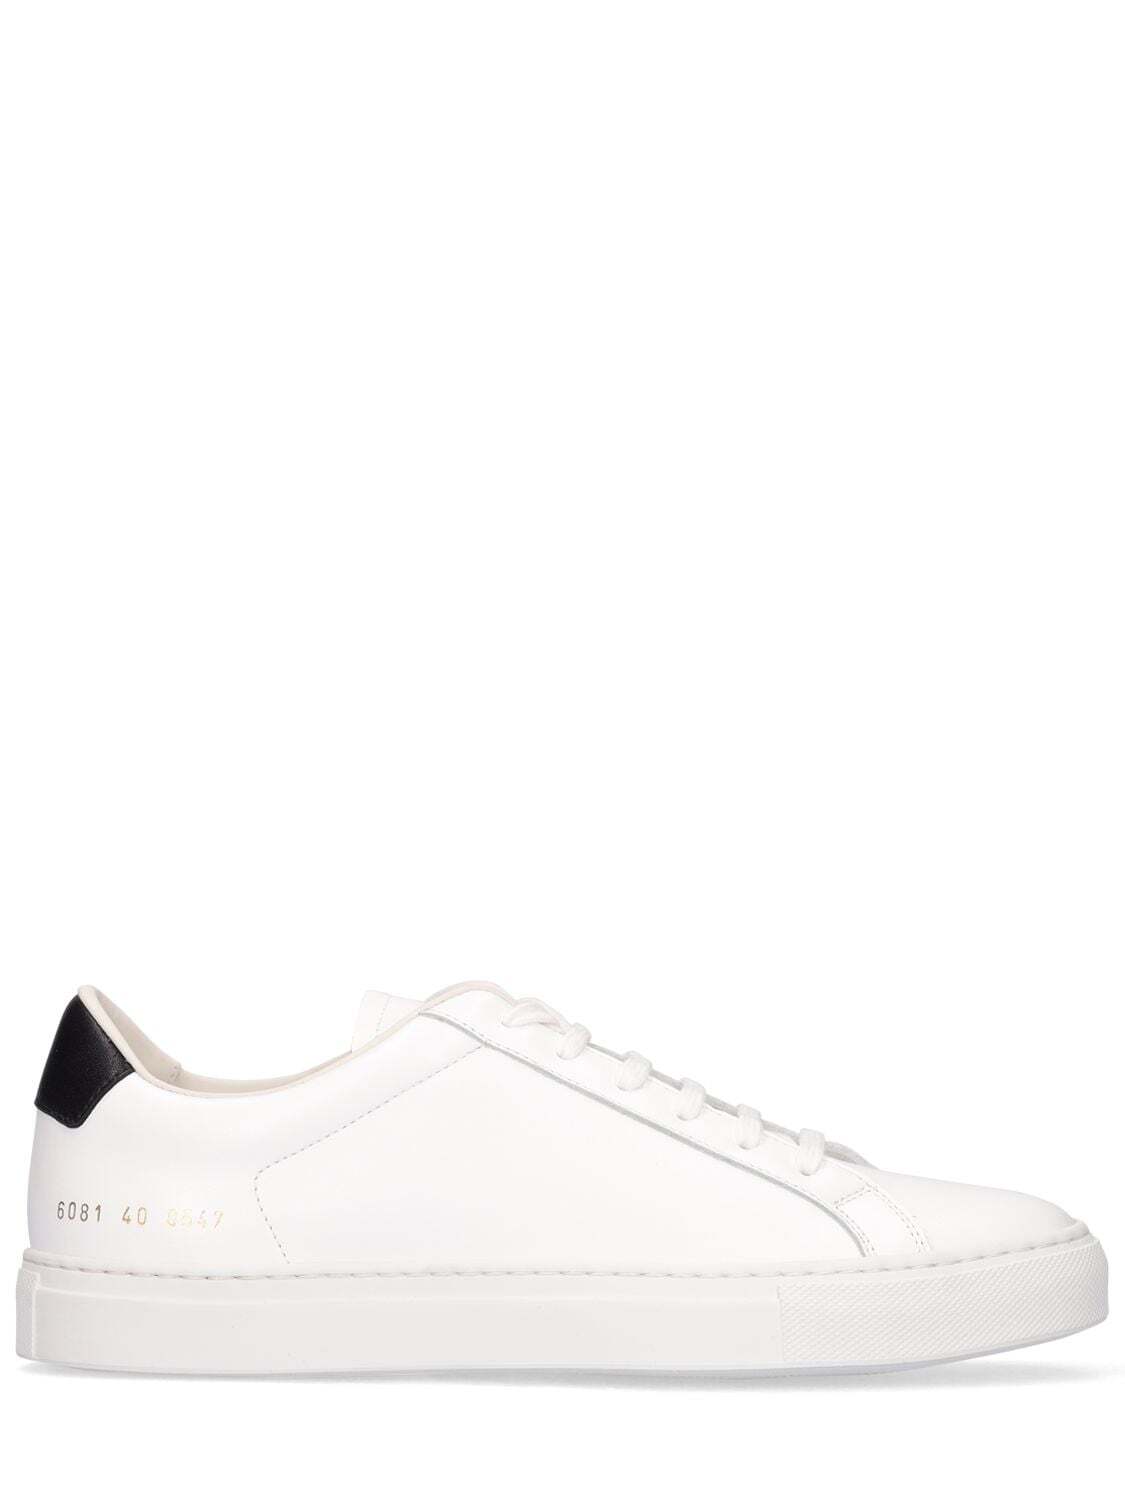 COMMON PROJECTS 20mm Retro Low Leather Sneakers in black / white